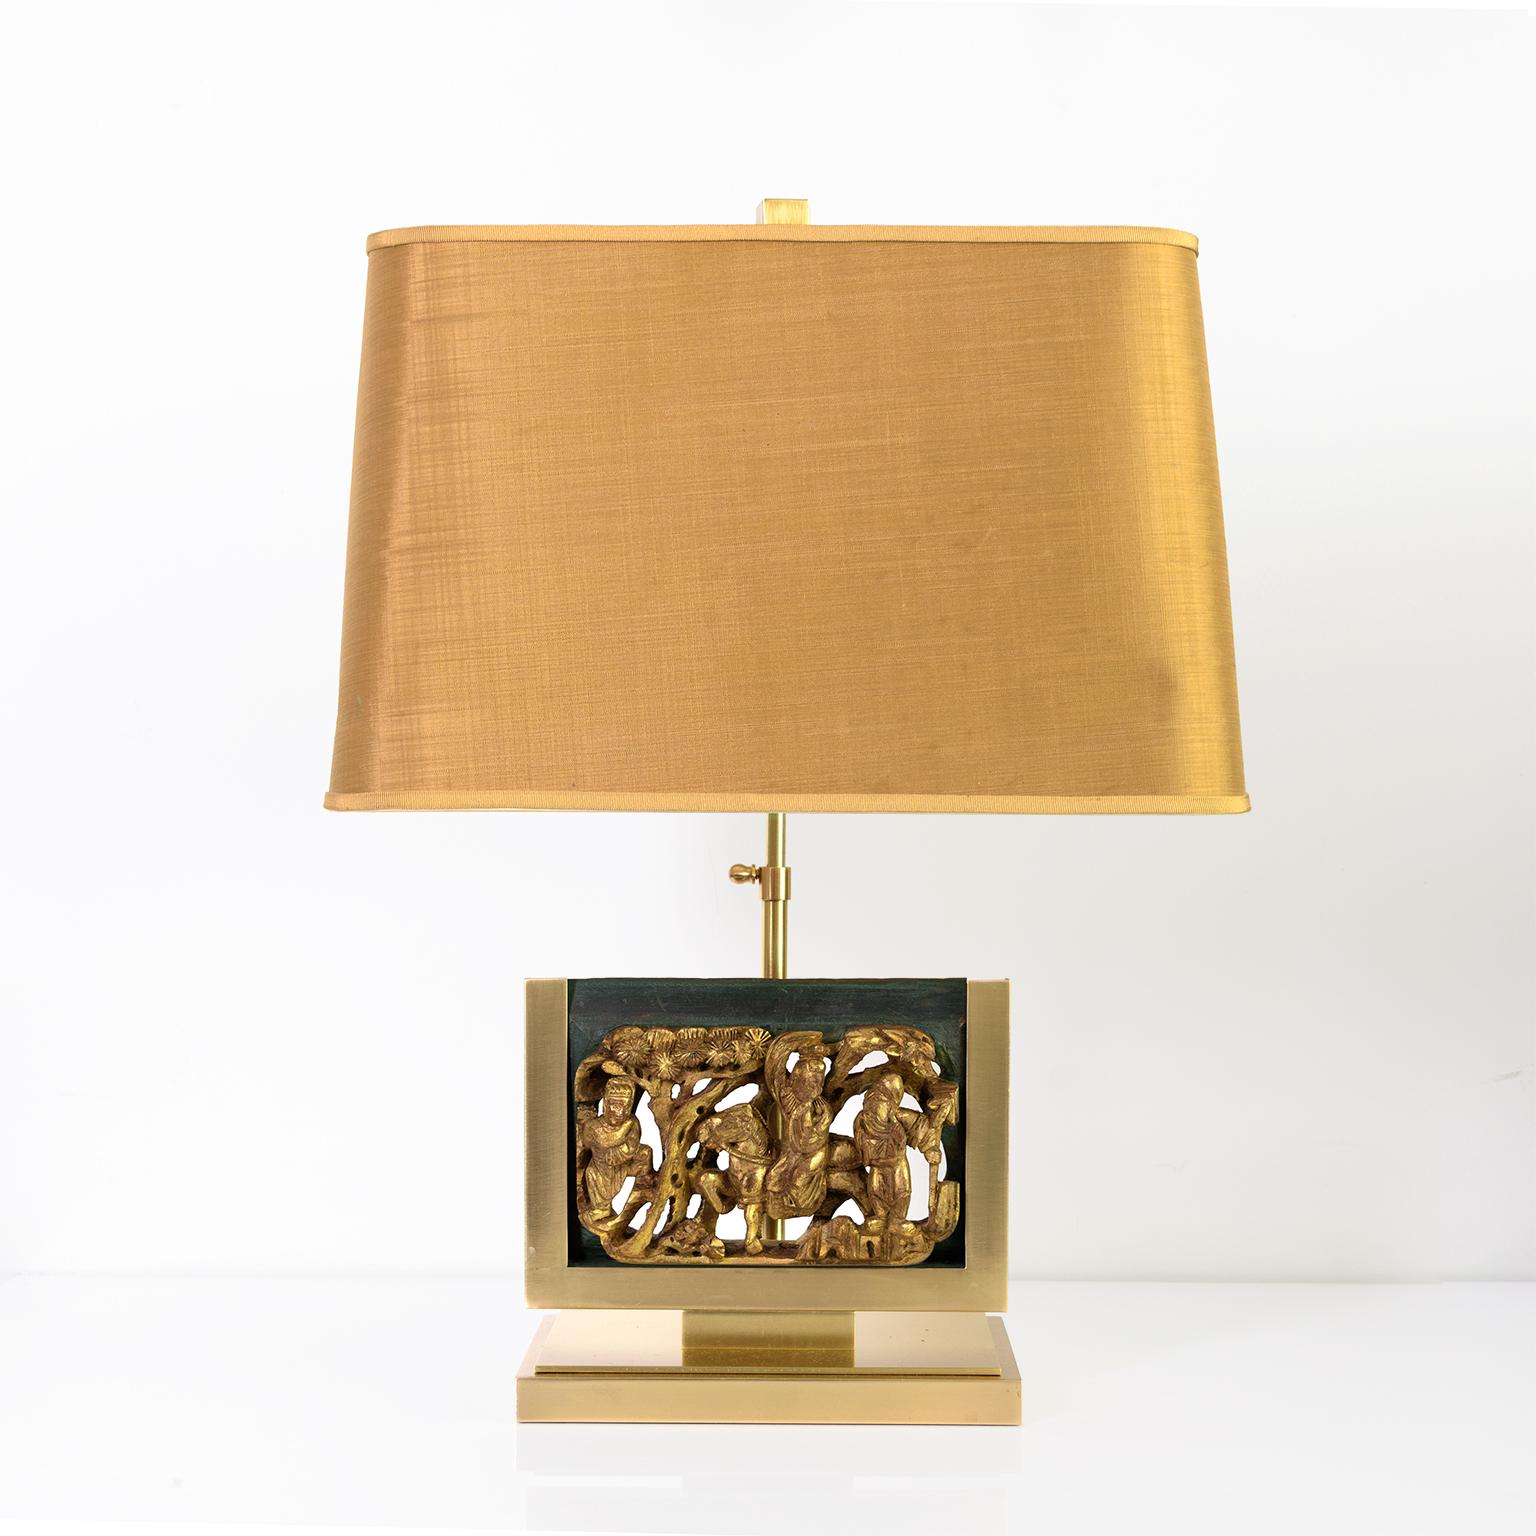 European Mid-Century Table Lamps Polished Brass Mounted Asian Gilt-Wood Carvings For Sale